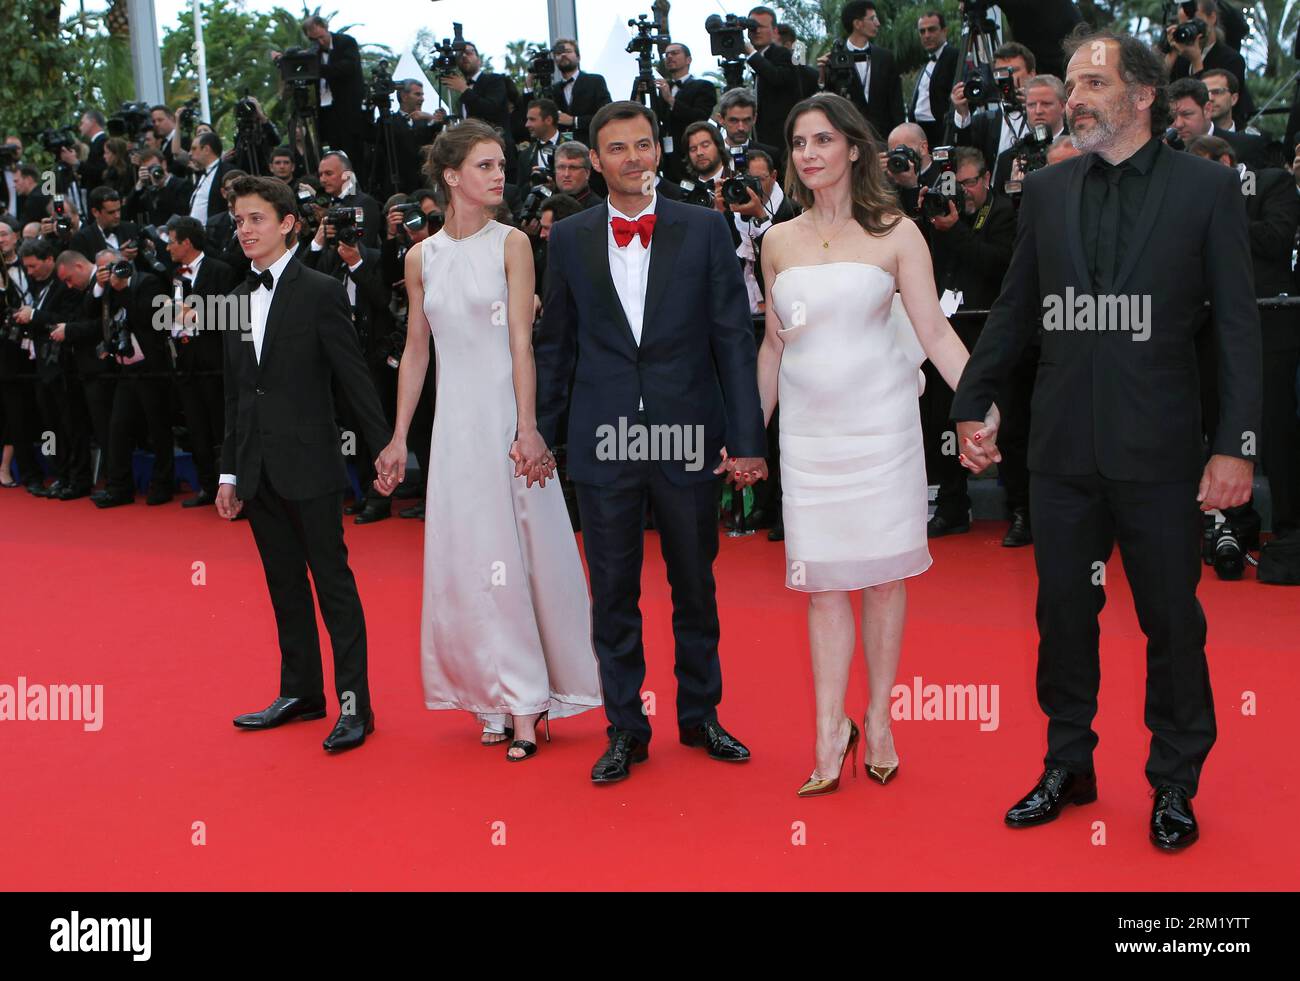 Bildnummer: 59655225  Datum: 16.05.2013  Copyright: imago/Xinhua (130516) -- CANNES, May 16, 2013 (Xinhua) -- (R-L) French actor Frederic Pierrot, French actress Geraldine Pailhas, French director Francois Ozon, French actress Marine Vacth and French actor Fantin Ravat arrive for the screening of Jeune & Jolie (Young & Beautiful) during the 66th annual Cannes Film Festival in Cannes, France, May 16, 2013. The movie is presented in the Official Competition of the festival which runs from May 15 to 26. (Xinhua/Gao Jing) FRANCE-CANNES-FILM FESTIVAL-JEUNE&JOLIE-PREMIERE PUBLICATIONxNOTxINxCHN Kult Stock Photo